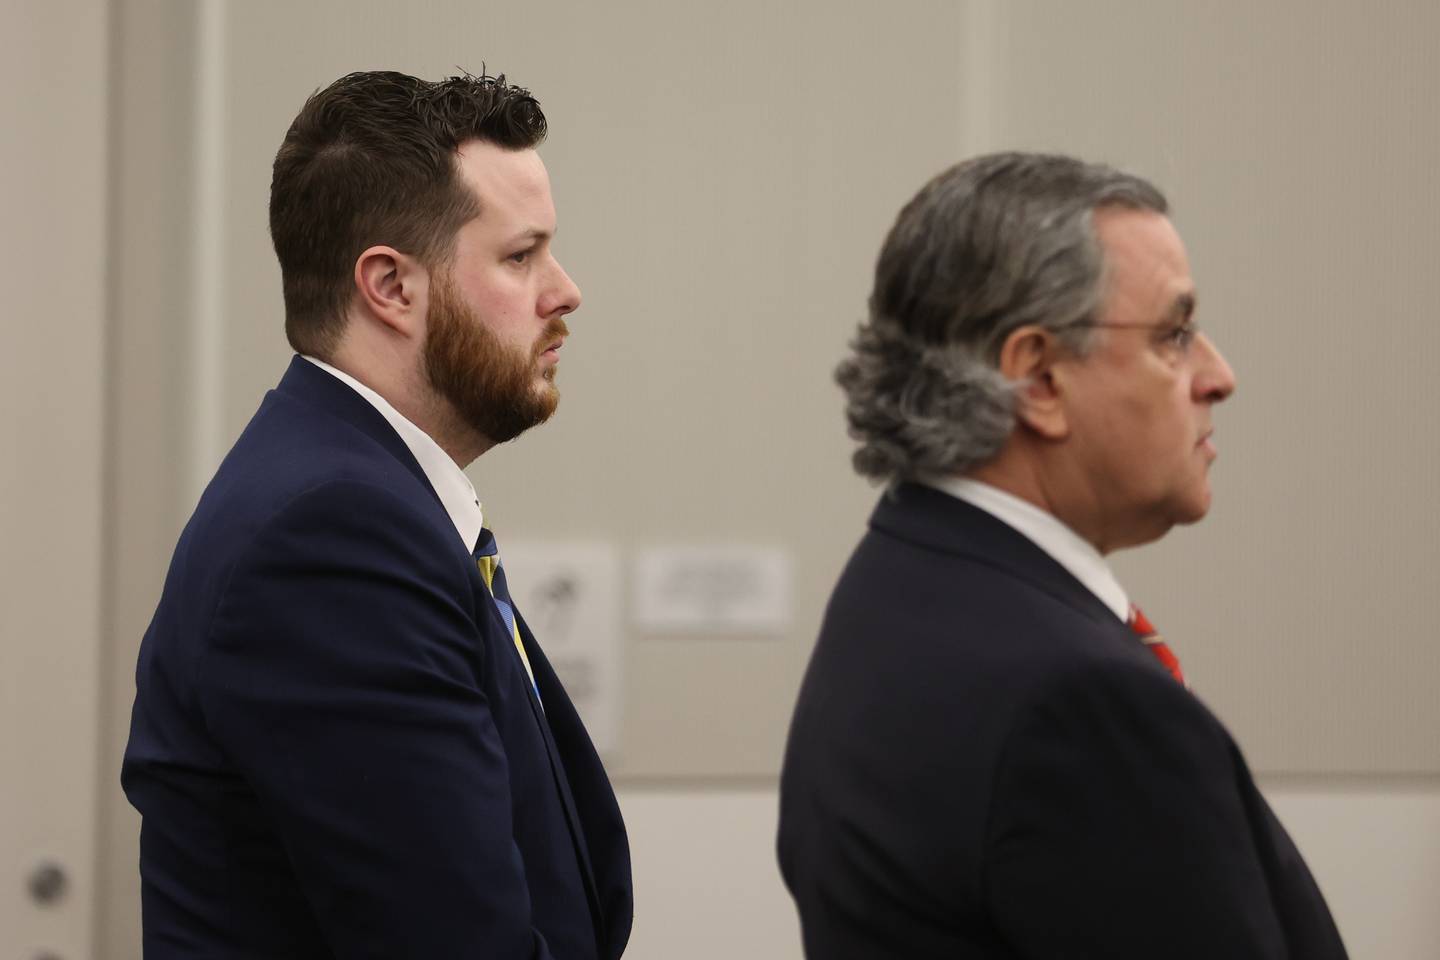 Sean Woulfe and Defense lawyer George Lenard stand as the jury enters the courtroom. Sean Woulfe, 29, is charge with reckless homicide of Lindsey Schmidt, 29, and her three sons, Owen, 6, Weston, 4, and Kaleb, 1. Monday, Mar. 28, 2022, in Joliet.